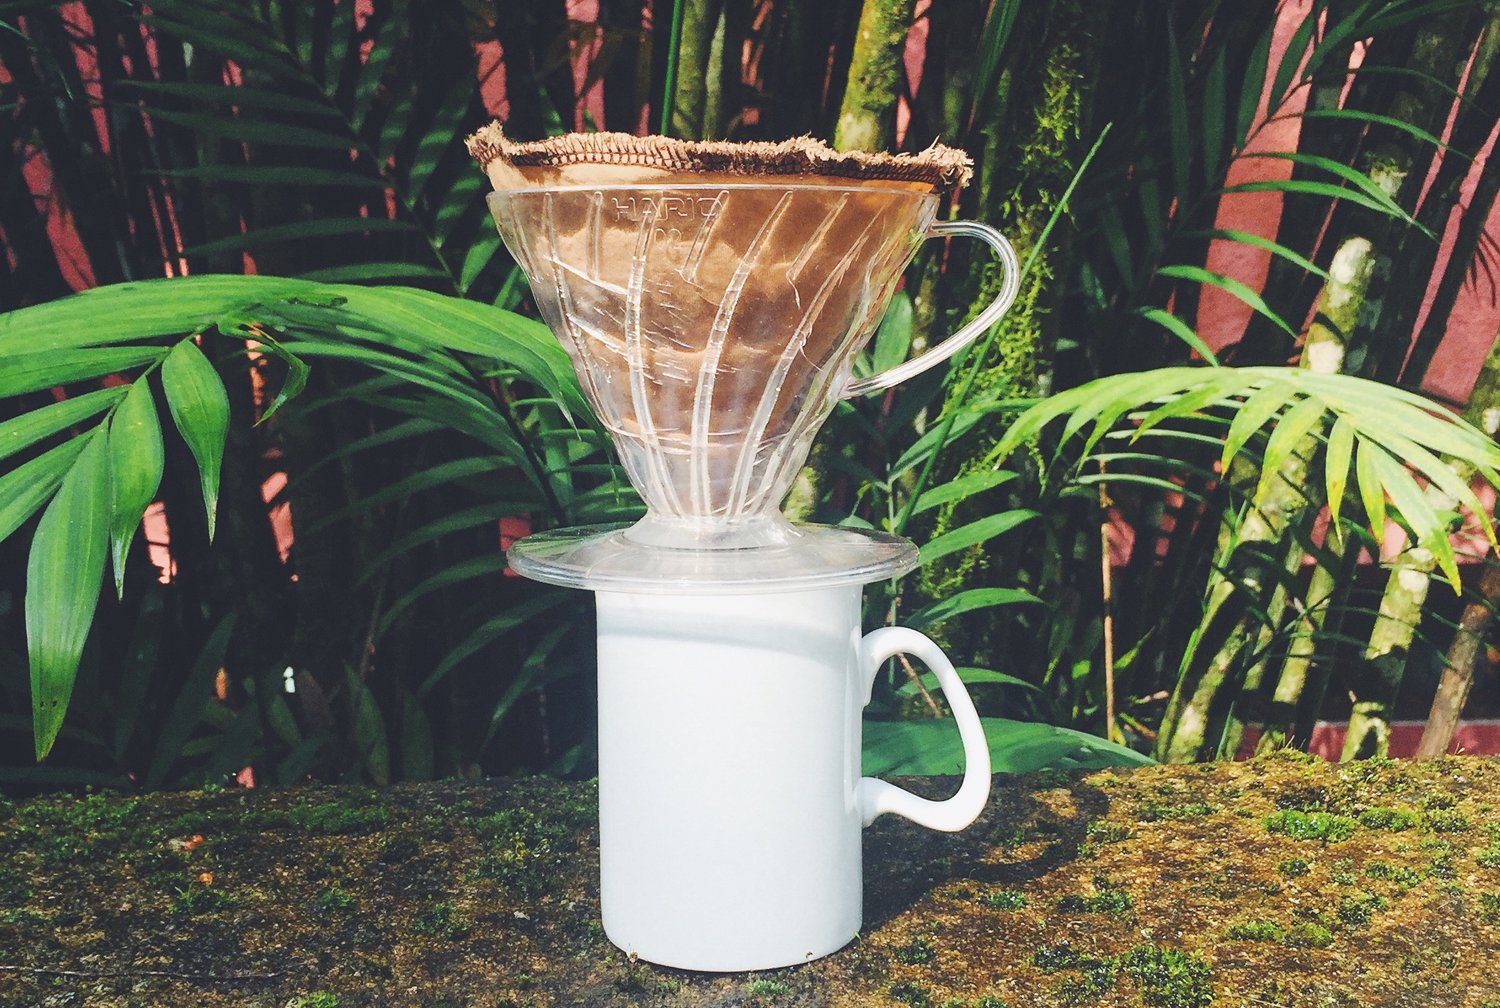 Hario V60 Coffee Dripper with a Coffeesock filter and coffee beans by Haciendo Coffee Roasters